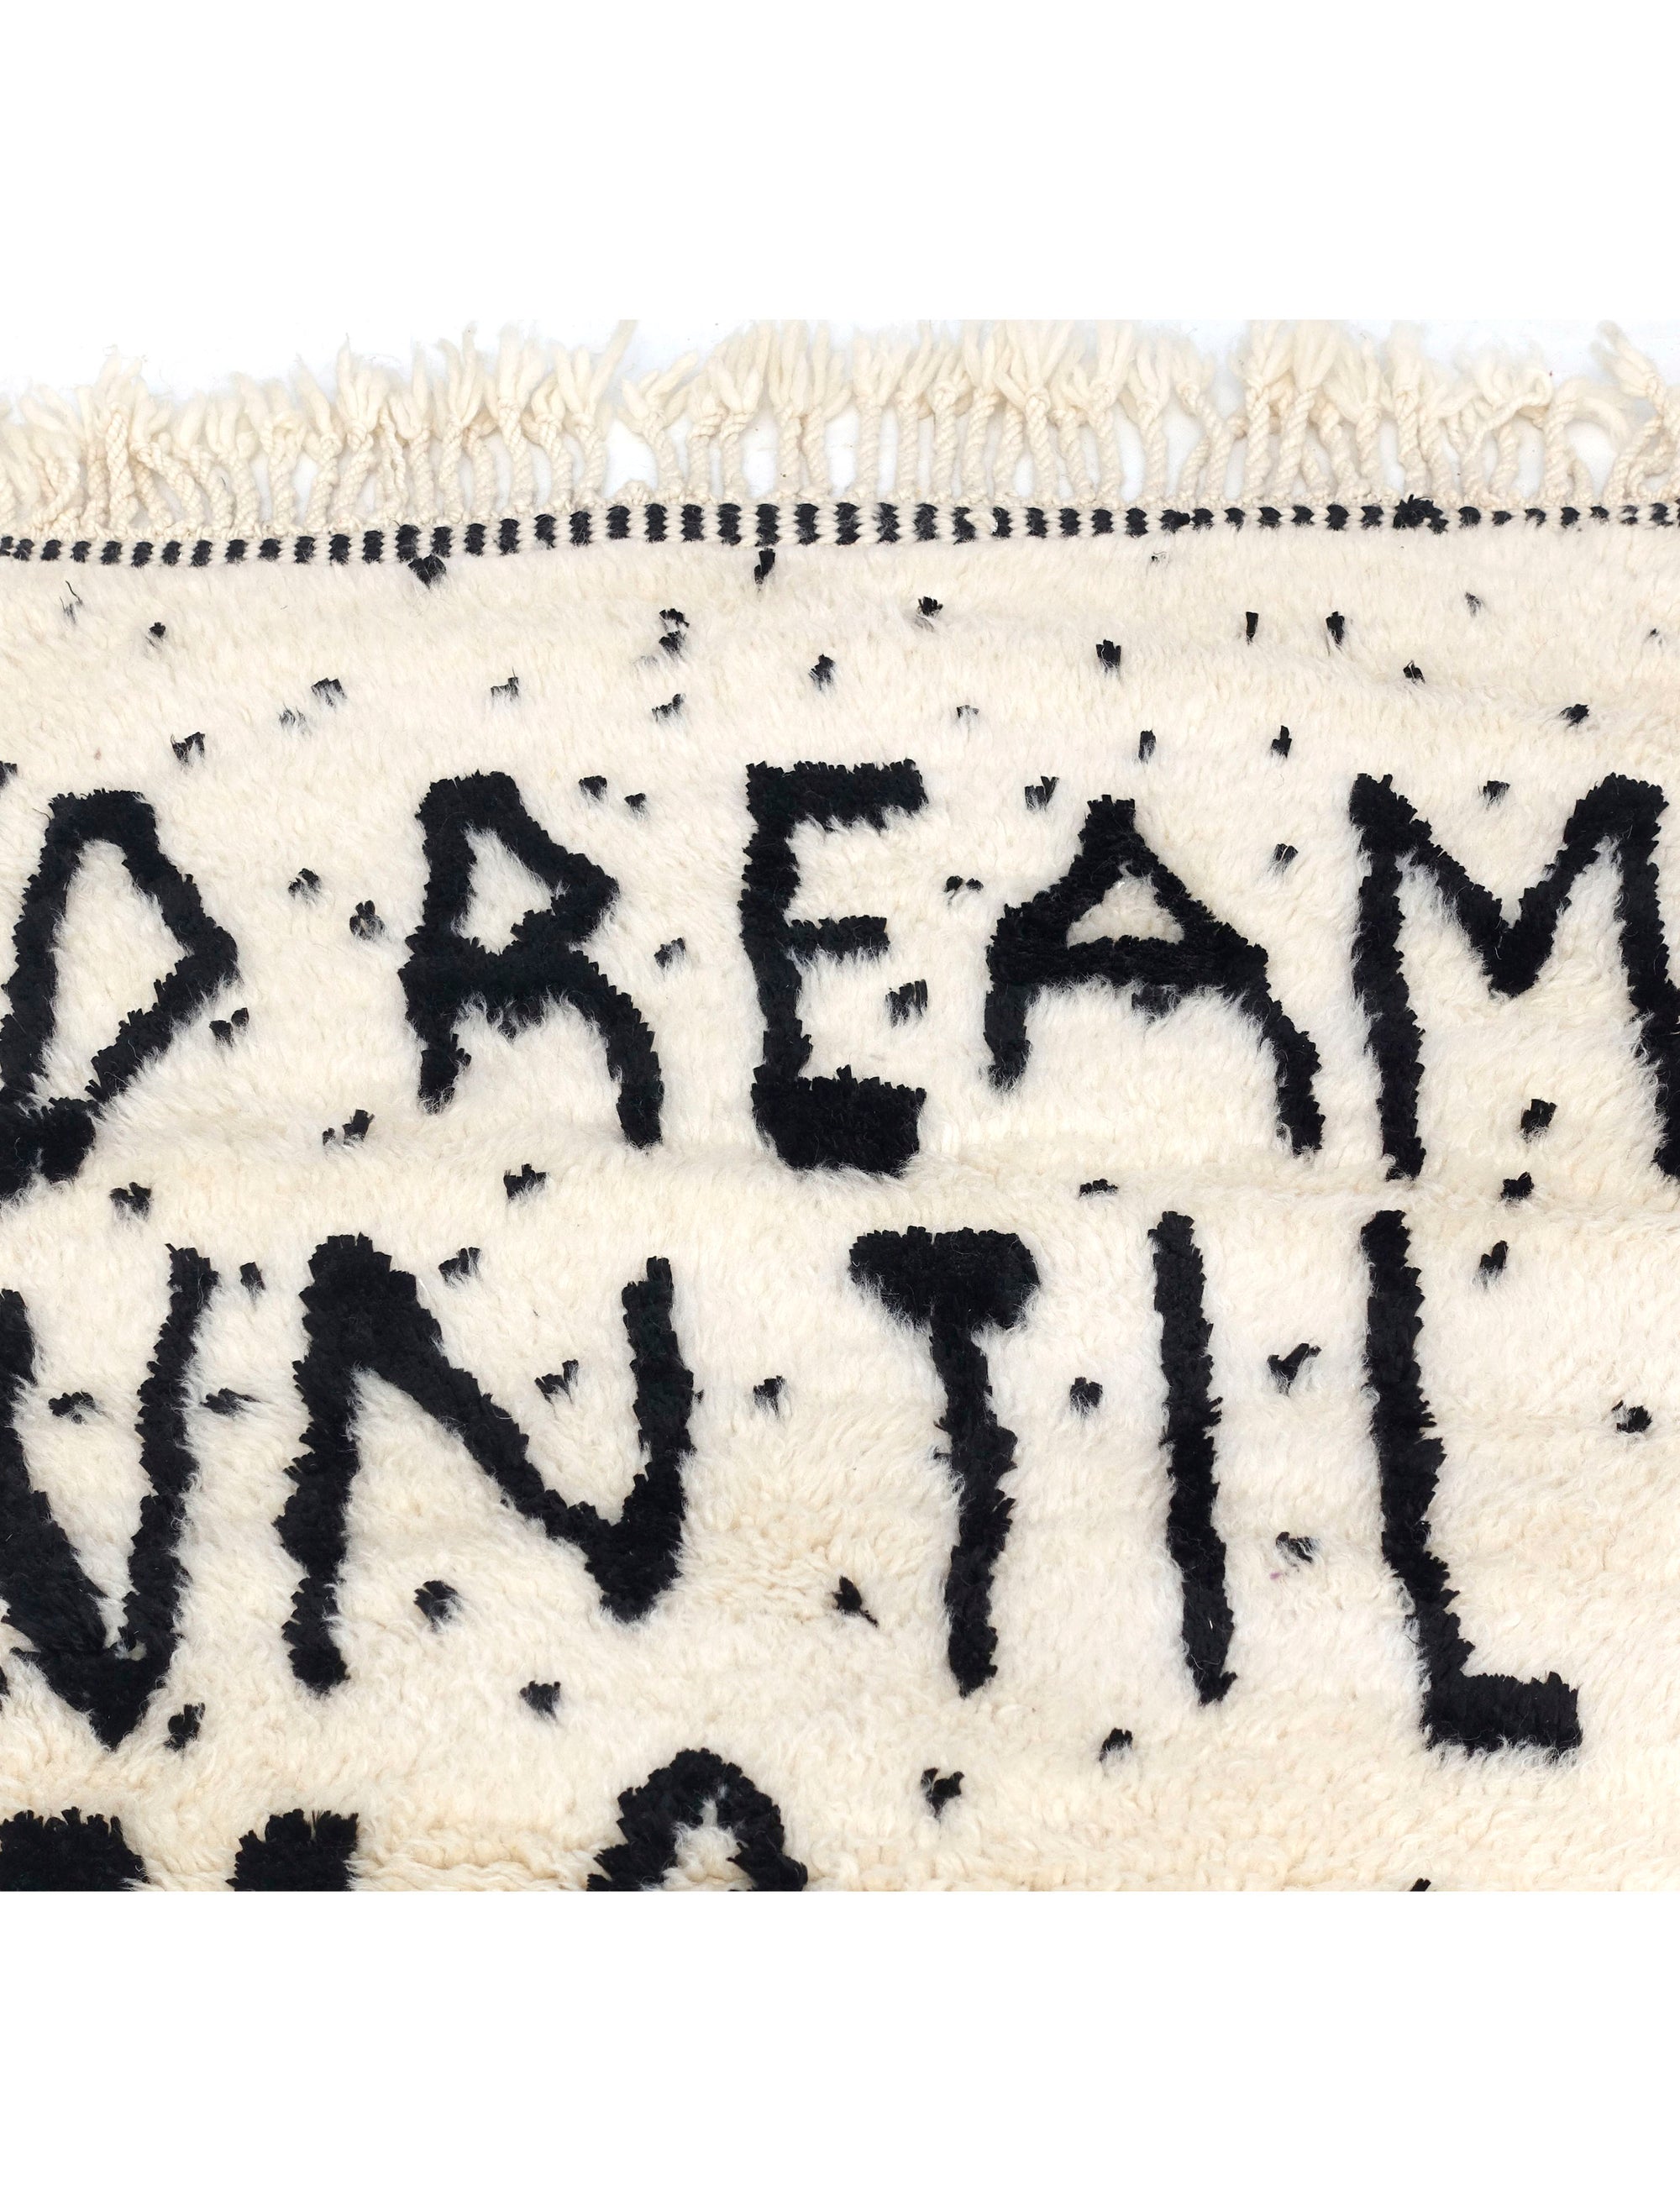 Experience the captivating allure of our Ivory Dreamscape Berber Rug, where the timeless charm of classic English script weaves a mantra of inspiration: "Dream Until It Is Your Reality." Immerse your space in this exquisite blend of classic design and motivational sentiment, transforming your home with an air of elegance and aspiration.